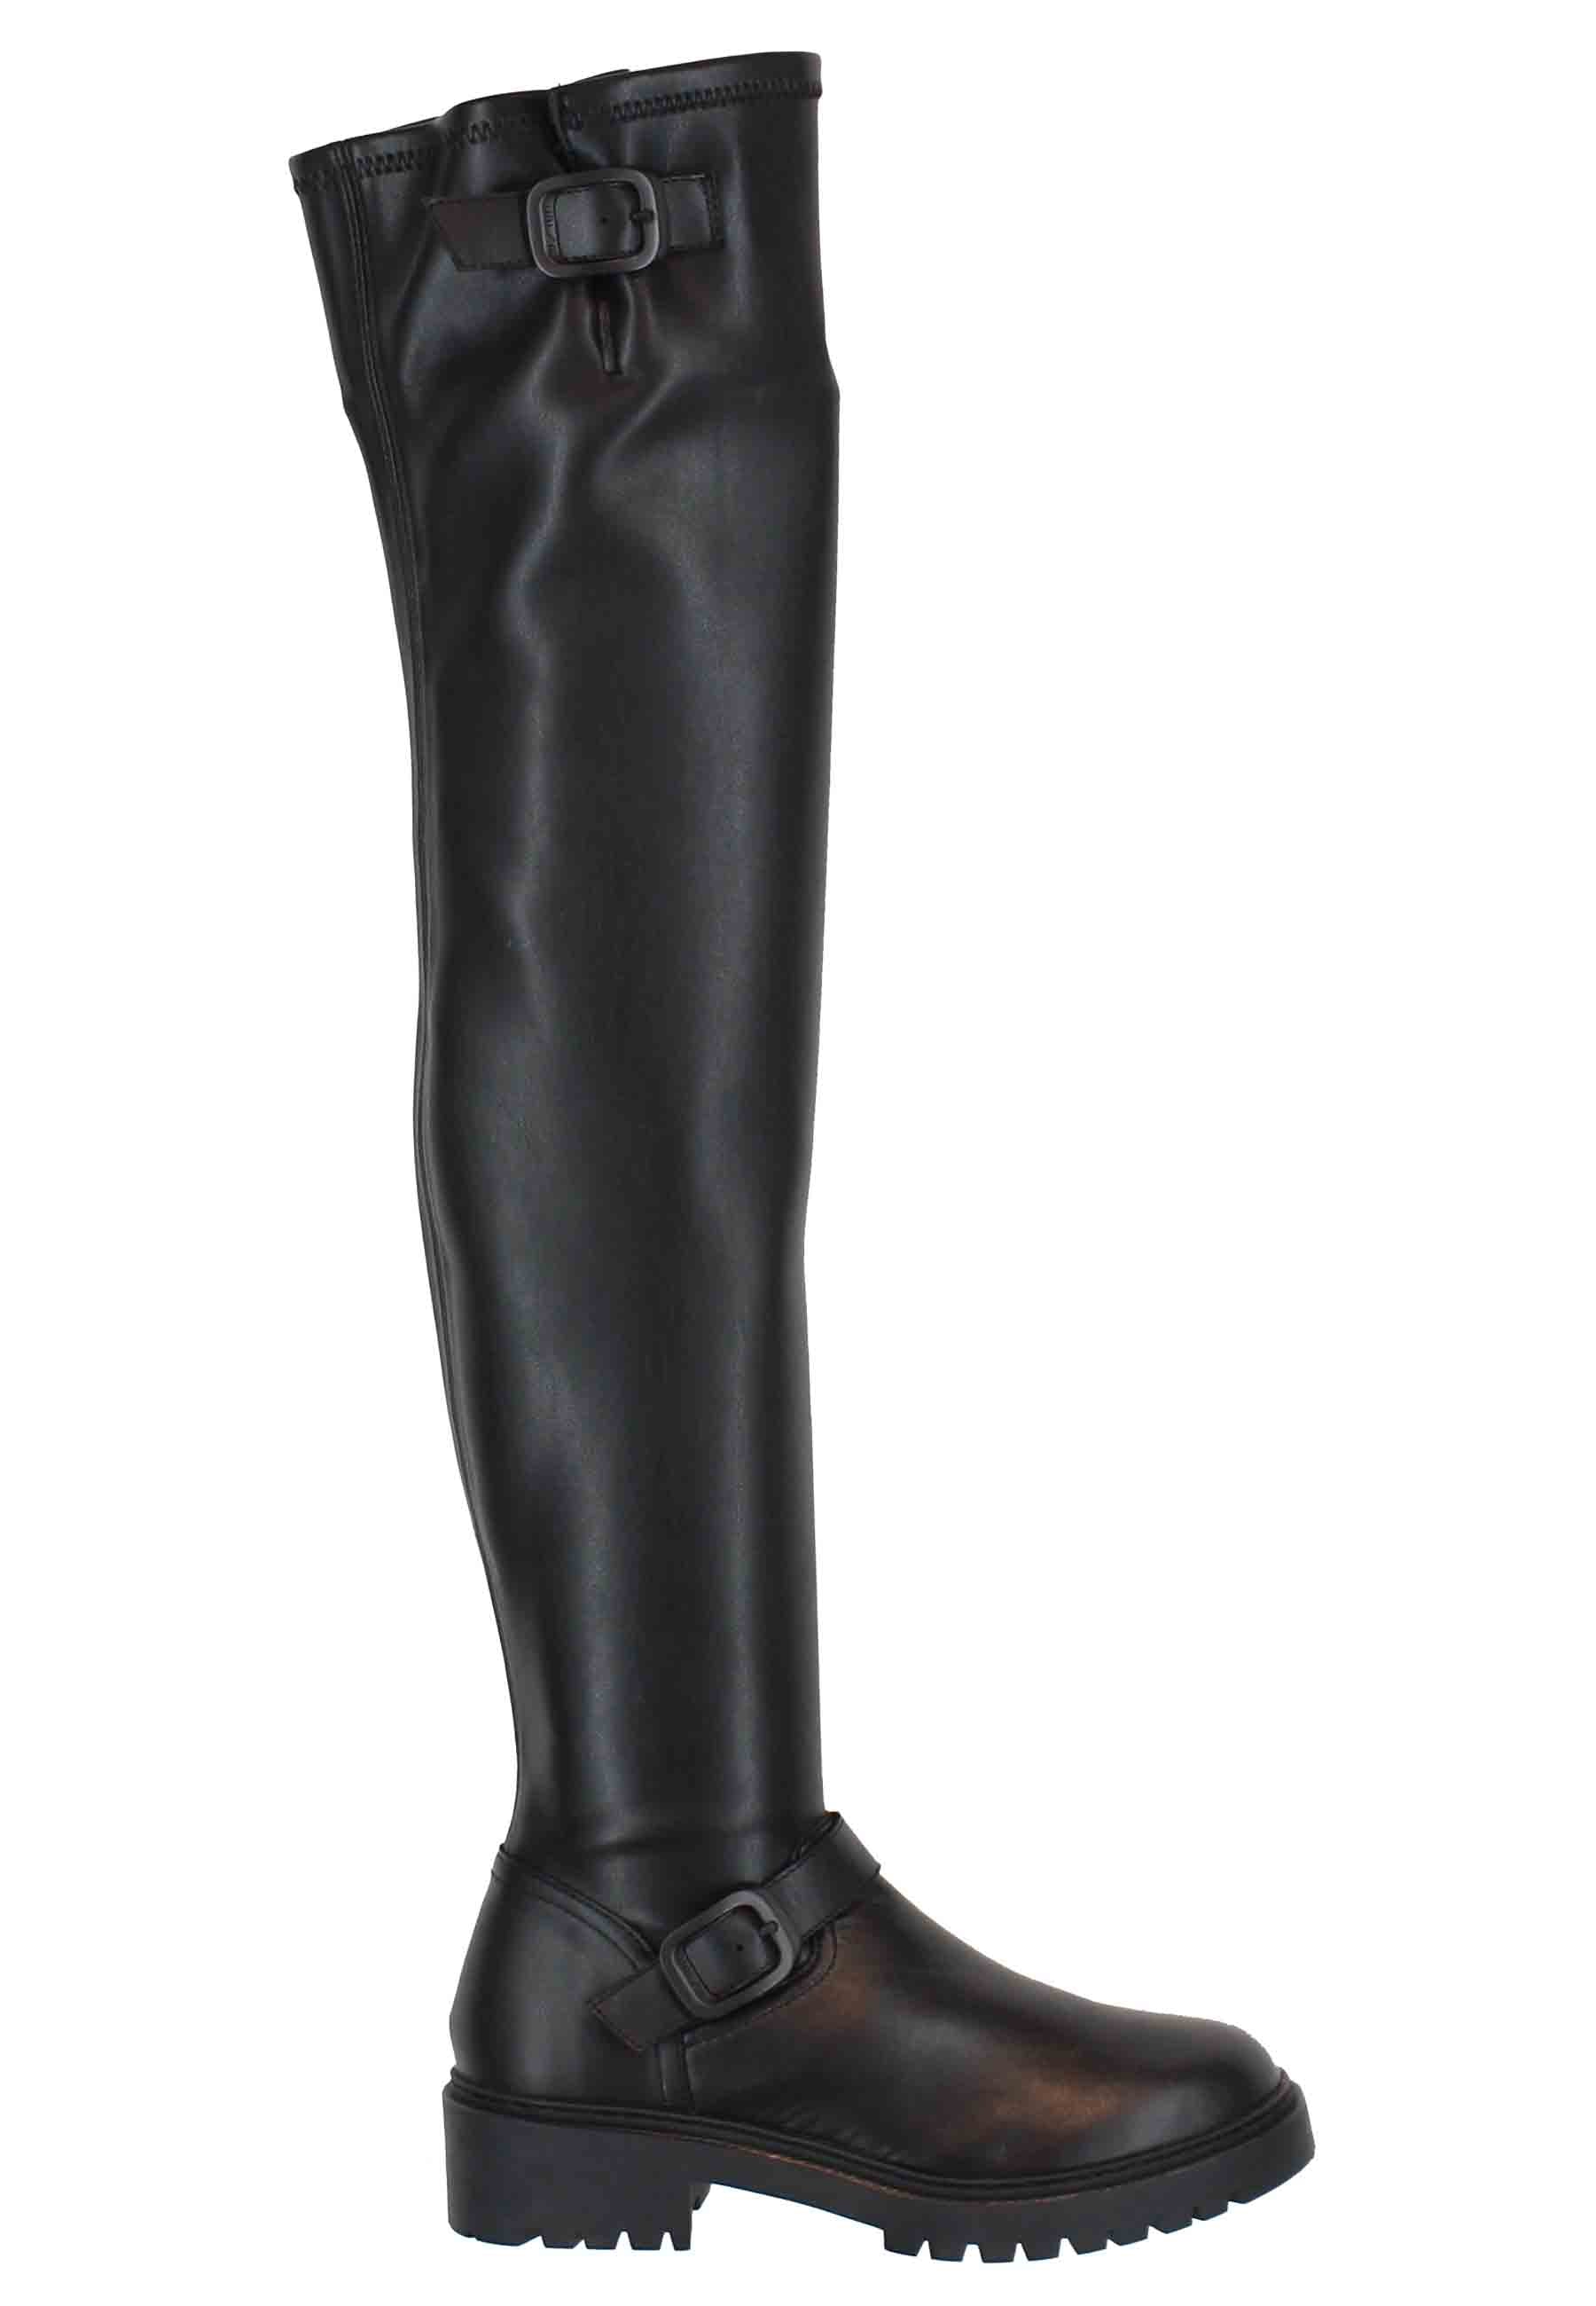 Women's high boot boots in black leather and lug sole